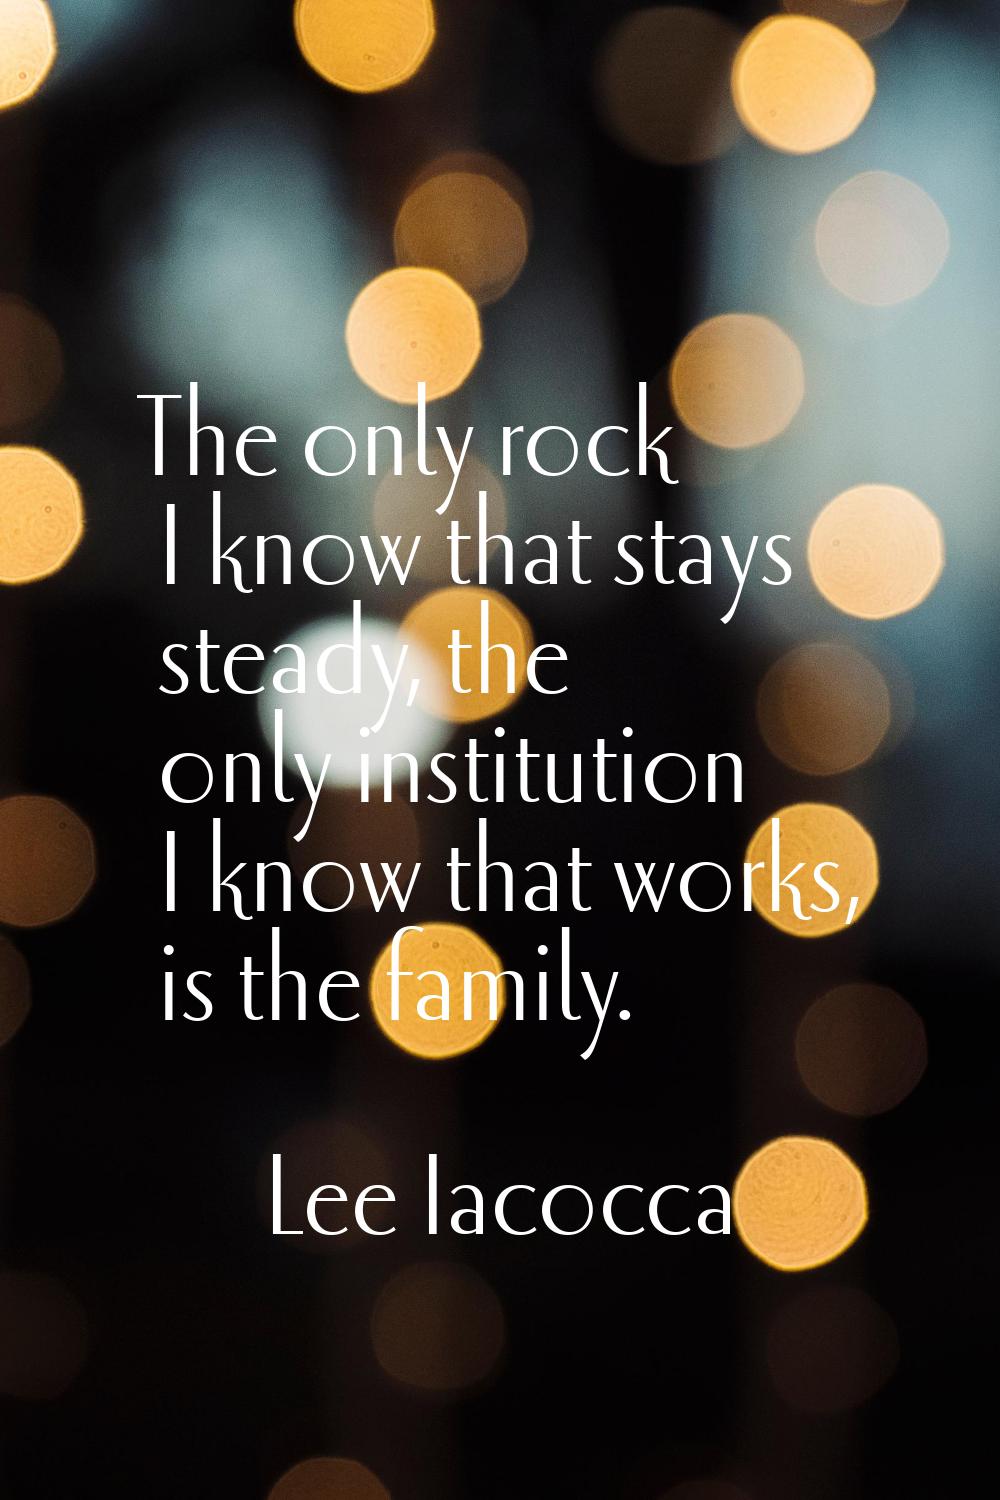 The only rock I know that stays steady, the only institution I know that works, is the family.